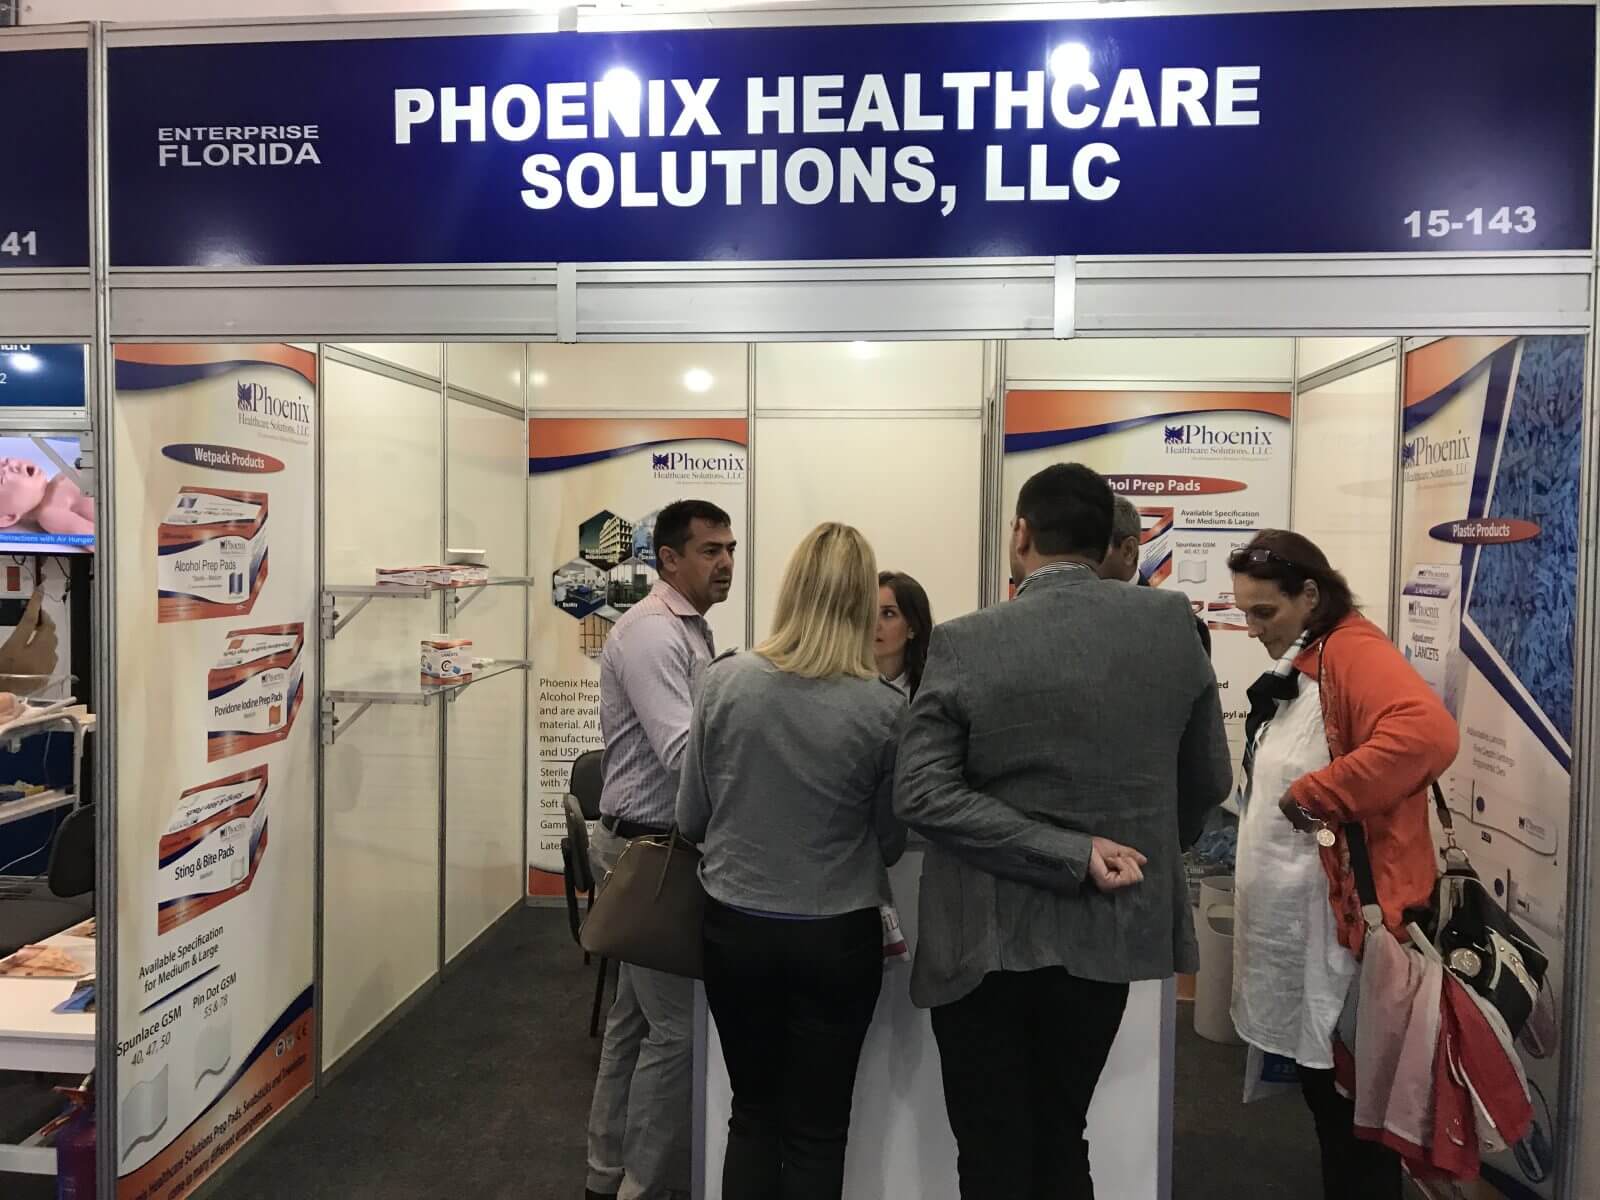 Florida Small Businesses Report $18 Million in Sales at Hospitalar Trade Show